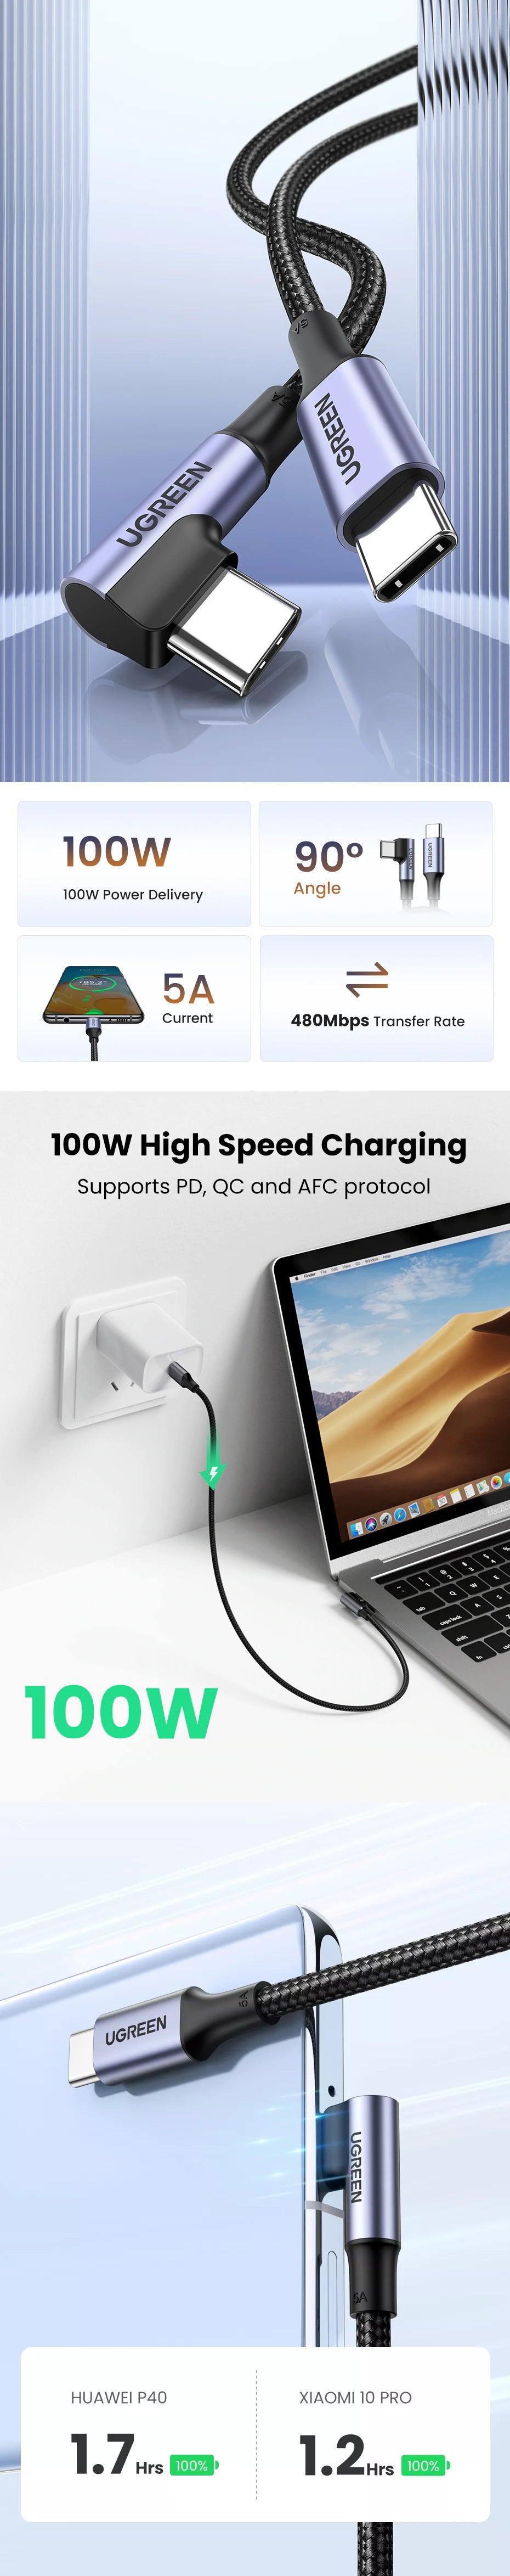 ugreen-right-angle-usb-c-to-usb-c-fast-charger-cable-100w-pd-5a-charging-overview-1-bsavvi - b.savvi